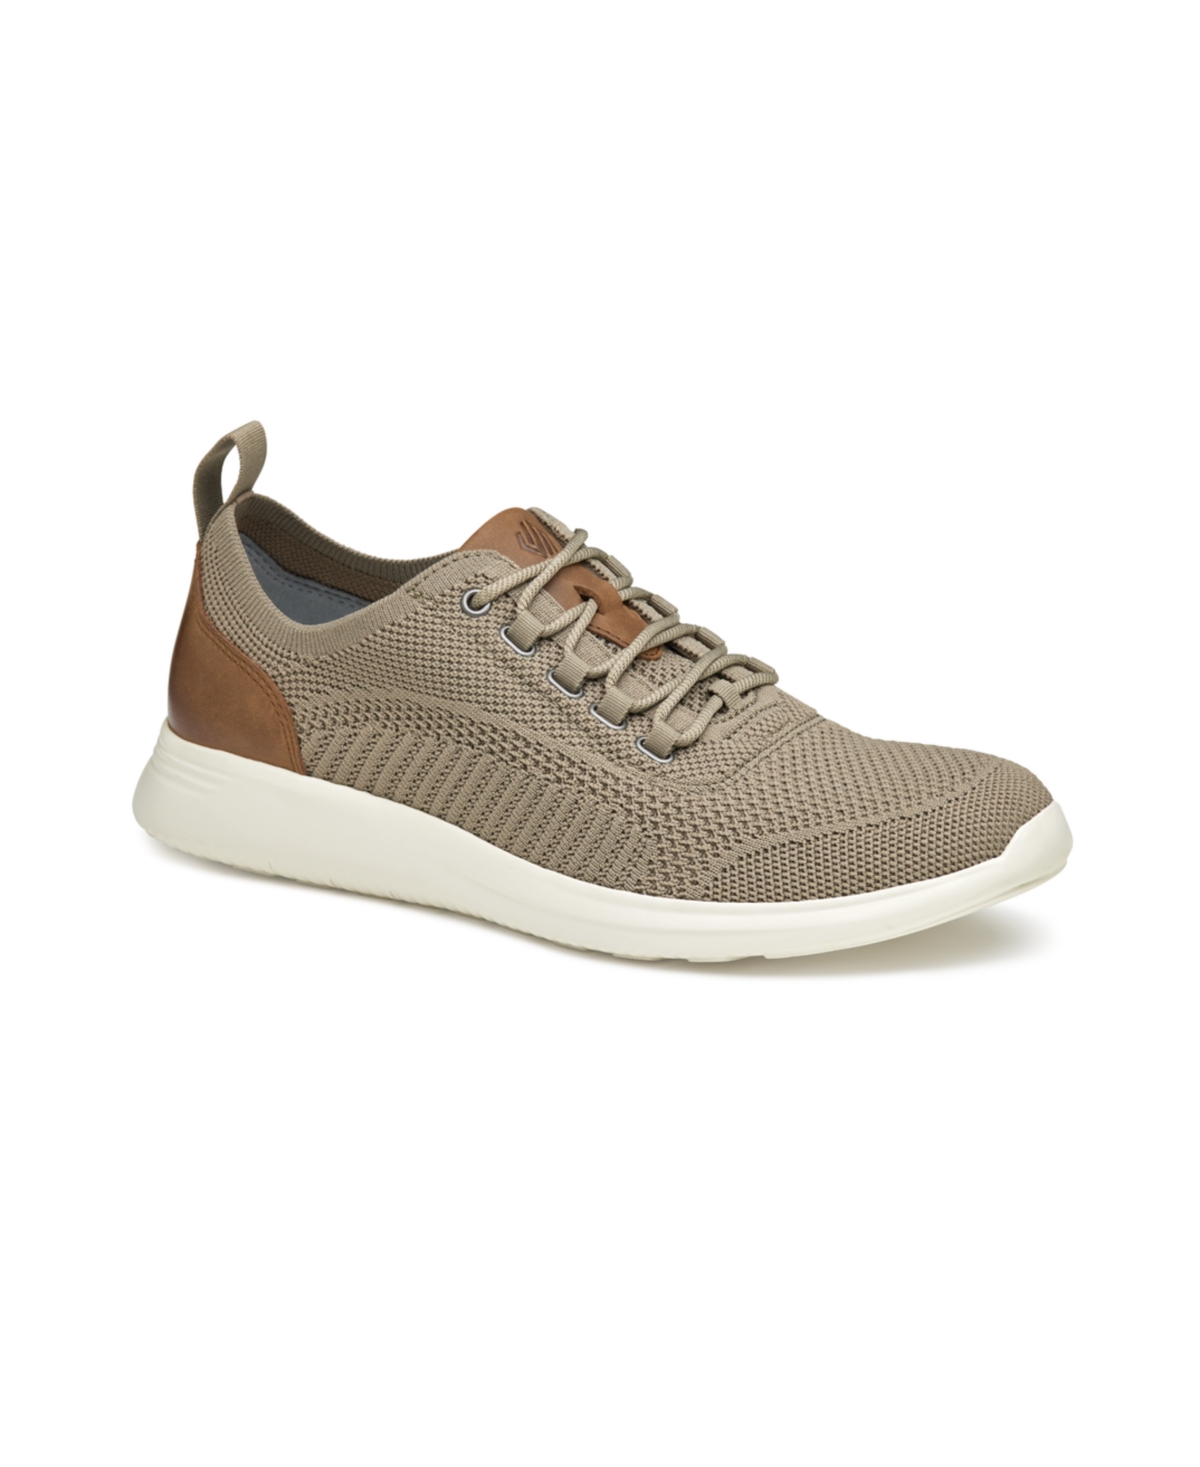 Men's Amherst Knit U-Throat Lace-Up Sneakers - Taupe